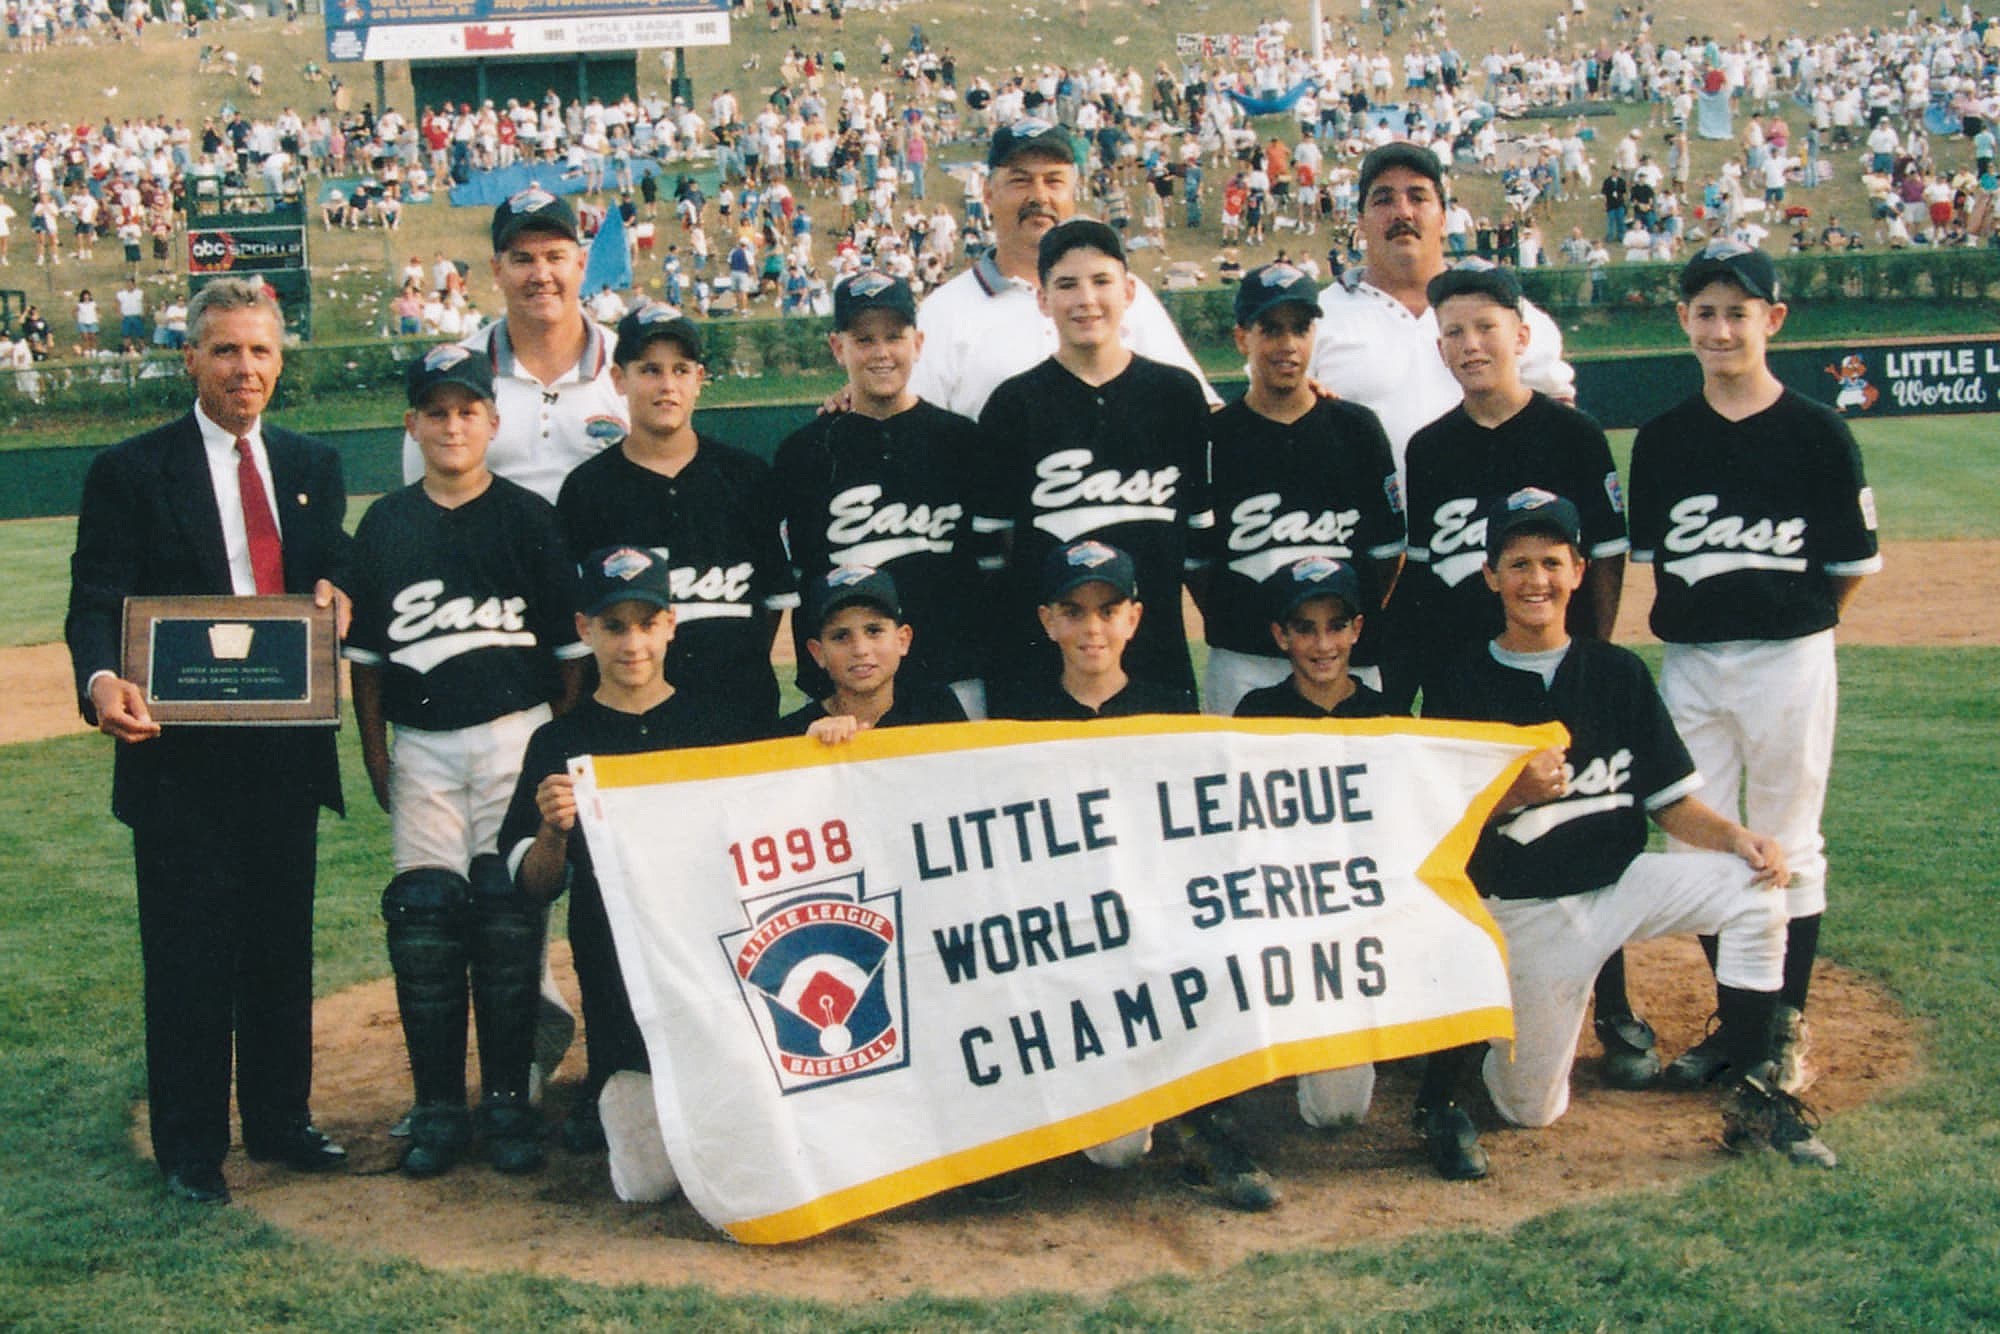 Todd Frazier debut on ESPN broadcasts for Little League World Series